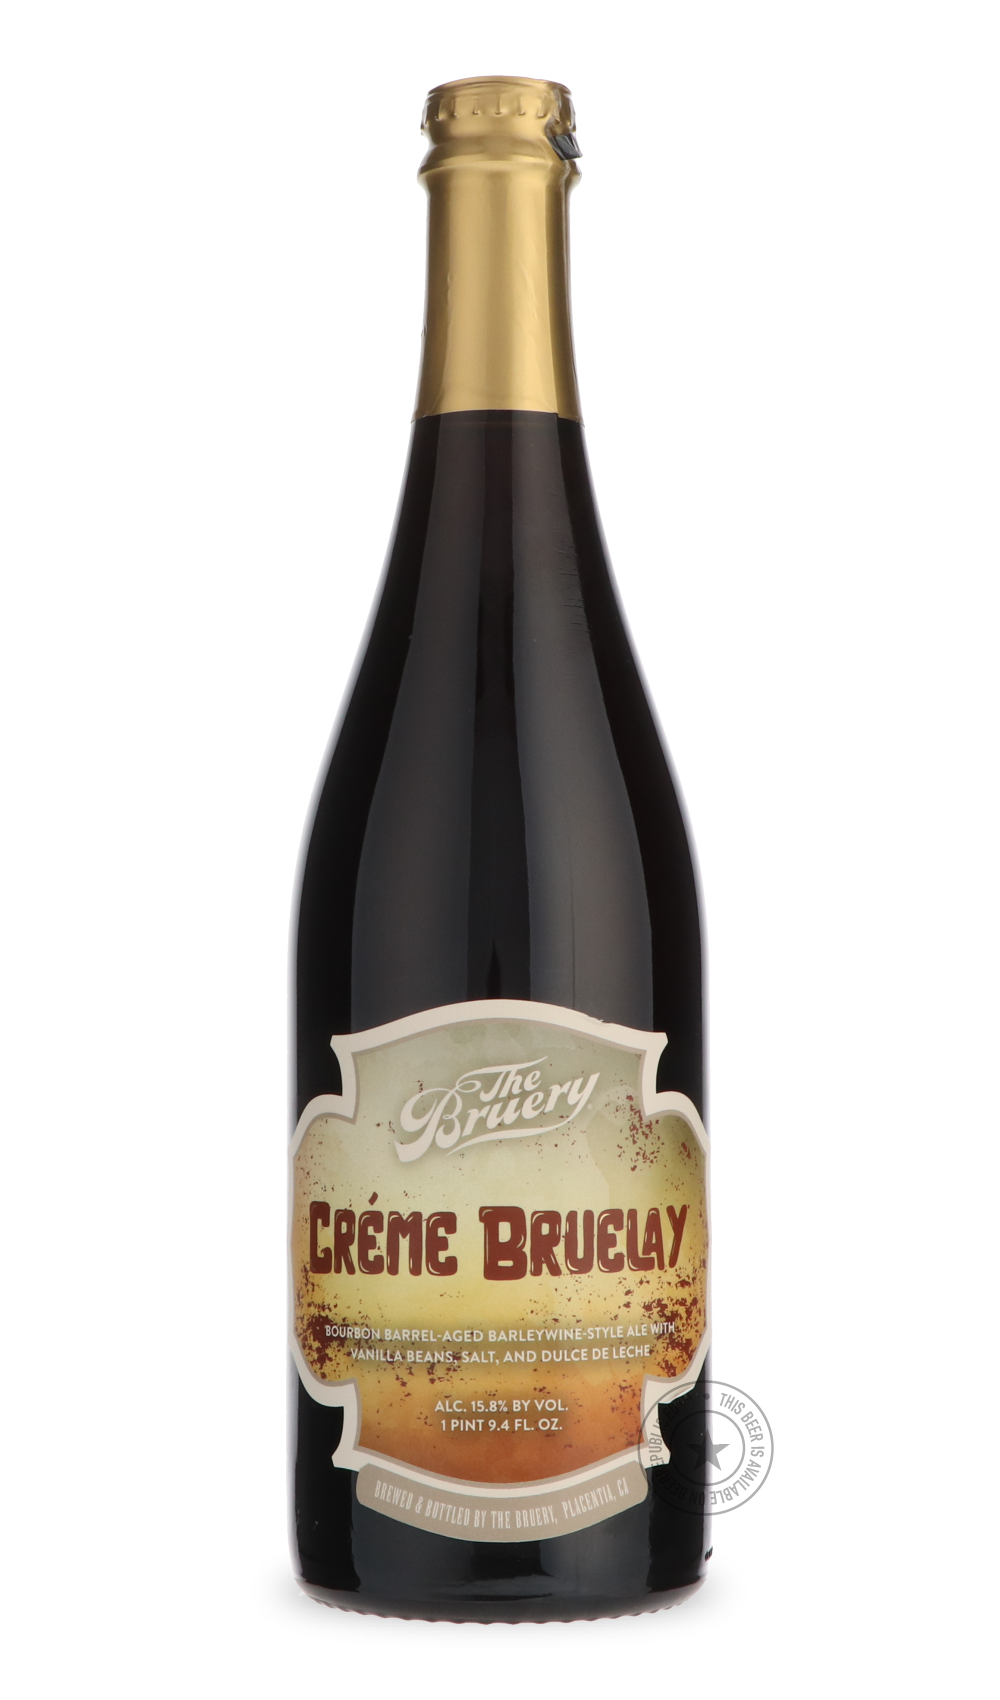 -The Bruery- Crème Bruelay-Brown & Dark- Only @ Beer Republic - The best online beer store for American & Canadian craft beer - Buy beer online from the USA and Canada - Bier online kopen - Amerikaans bier kopen - Craft beer store - Craft beer kopen - Amerikanisch bier kaufen - Bier online kaufen - Acheter biere online - IPA - Stout - Porter - New England IPA - Hazy IPA - Imperial Stout - Barrel Aged - Barrel Aged Imperial Stout - Brown - Dark beer - Blond - Blonde - Pilsner - Lager - Wheat - Weizen - Amber